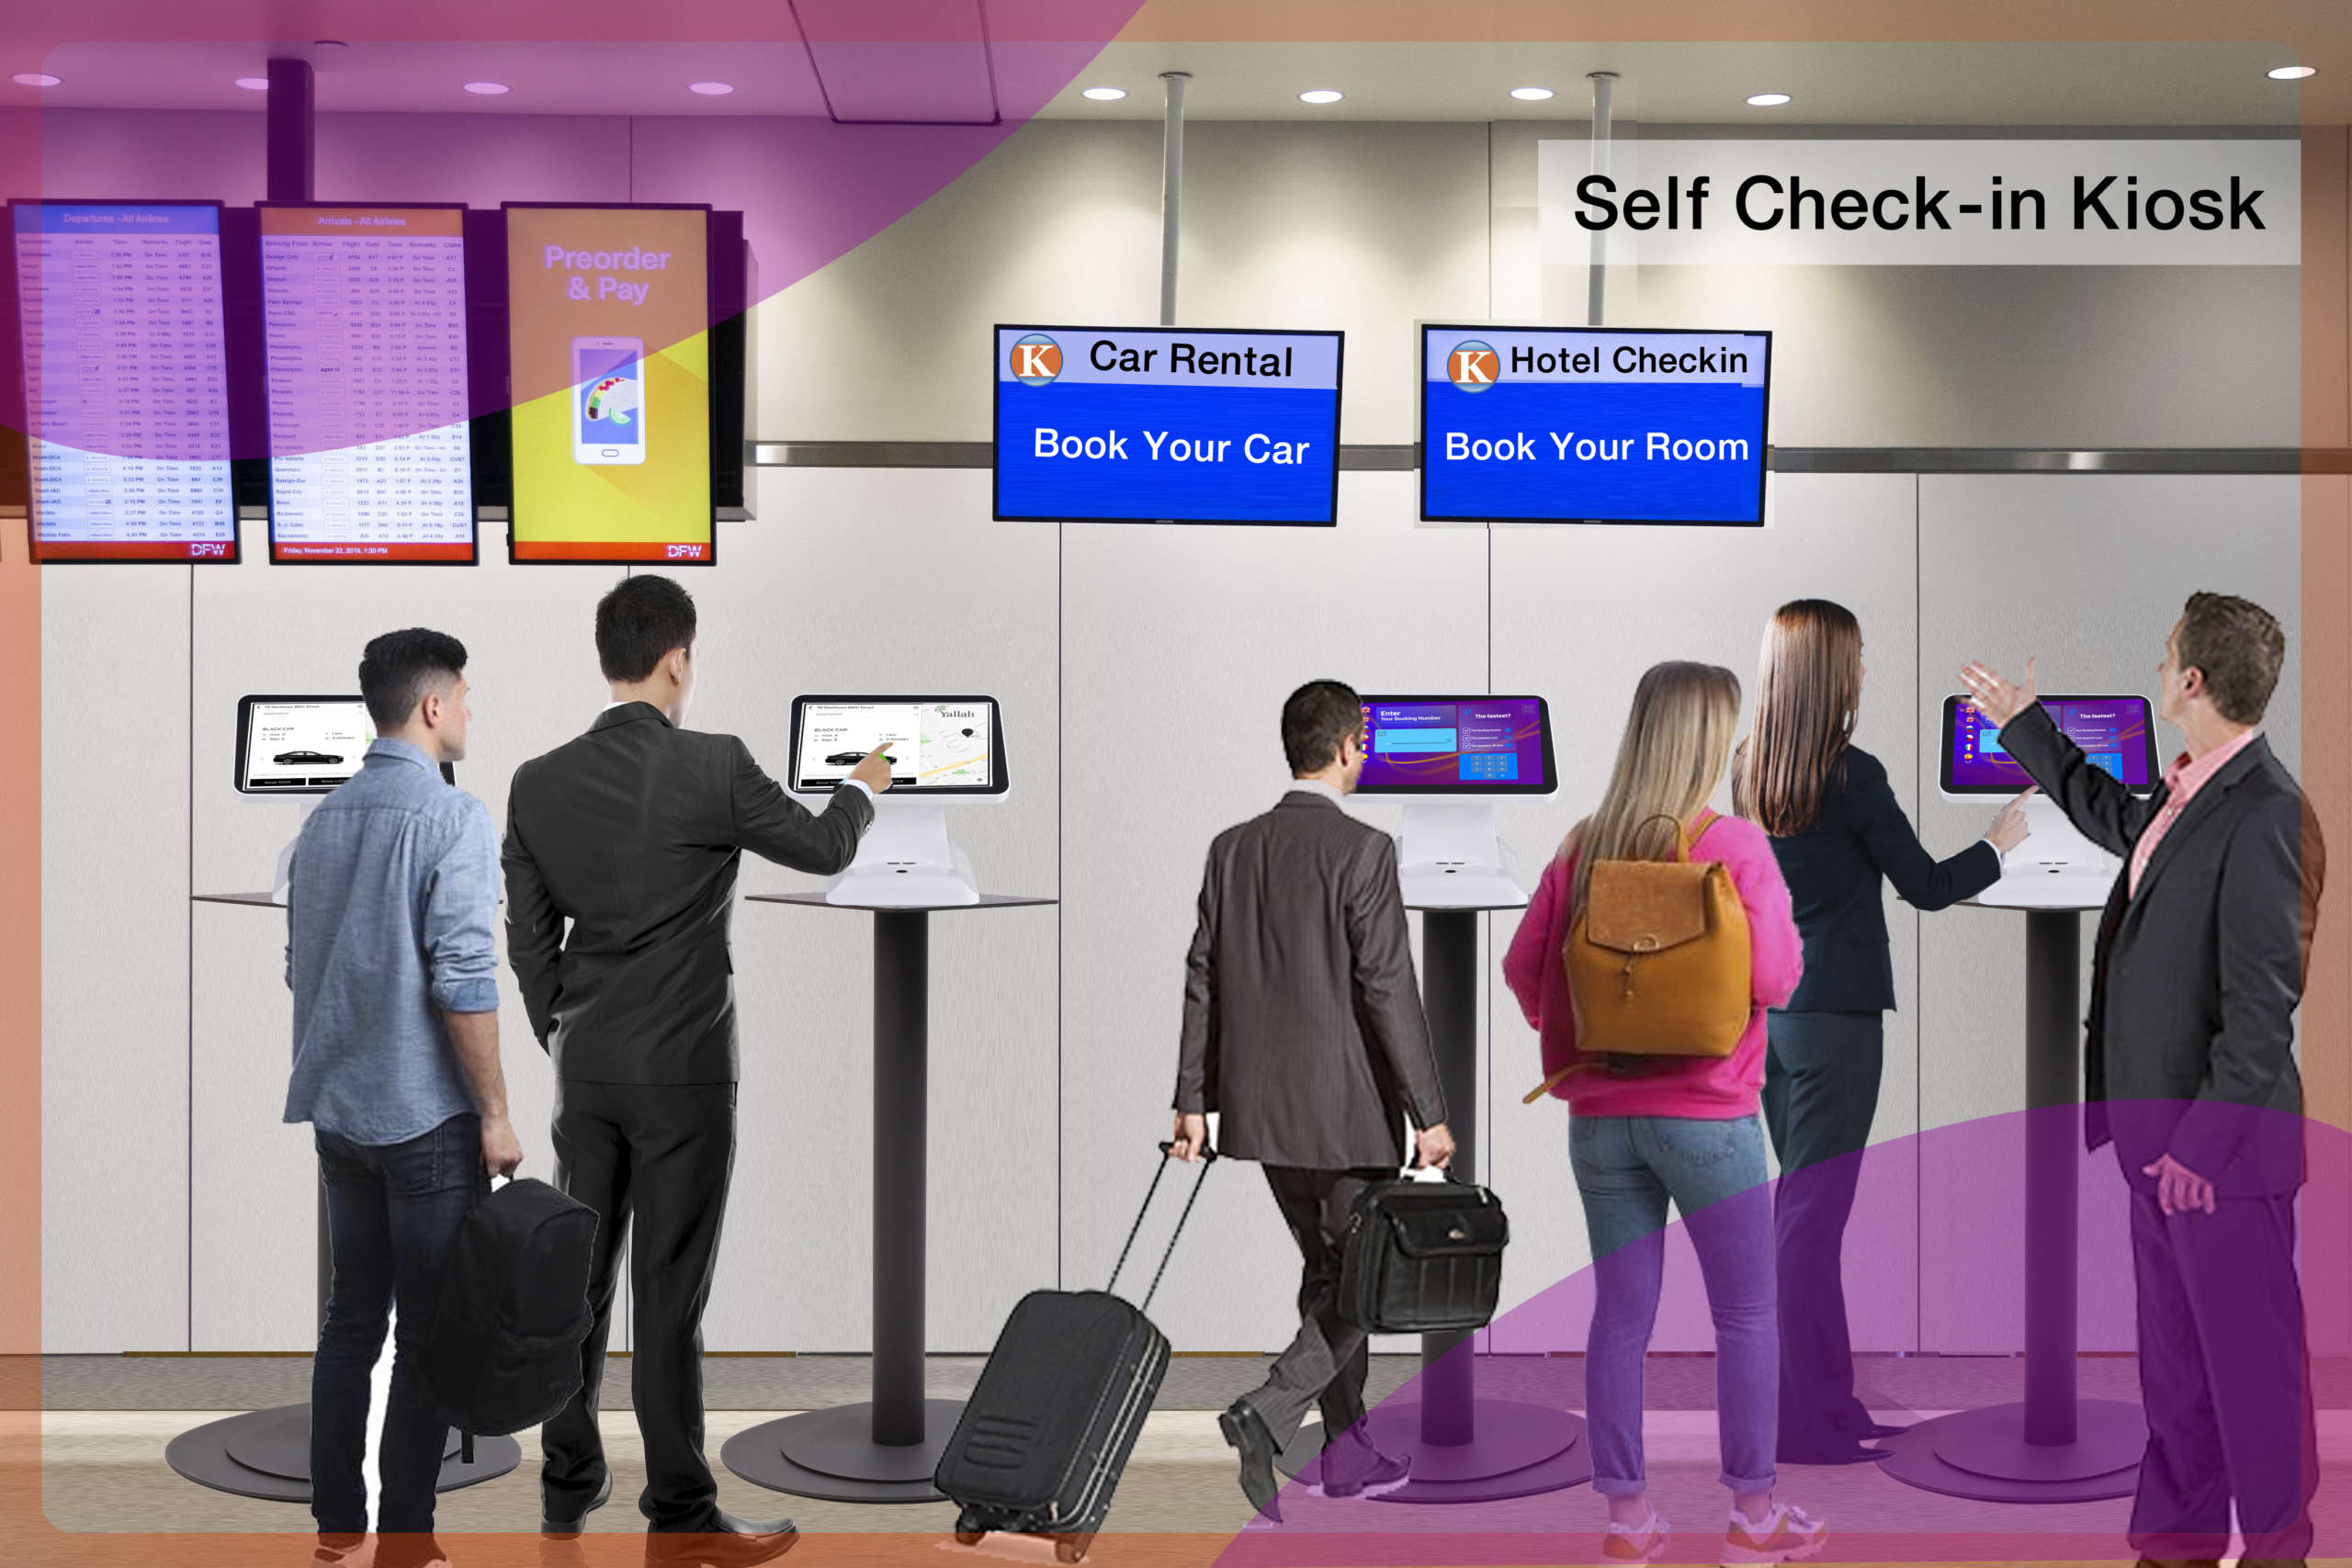 Airport hotels POS can benefit